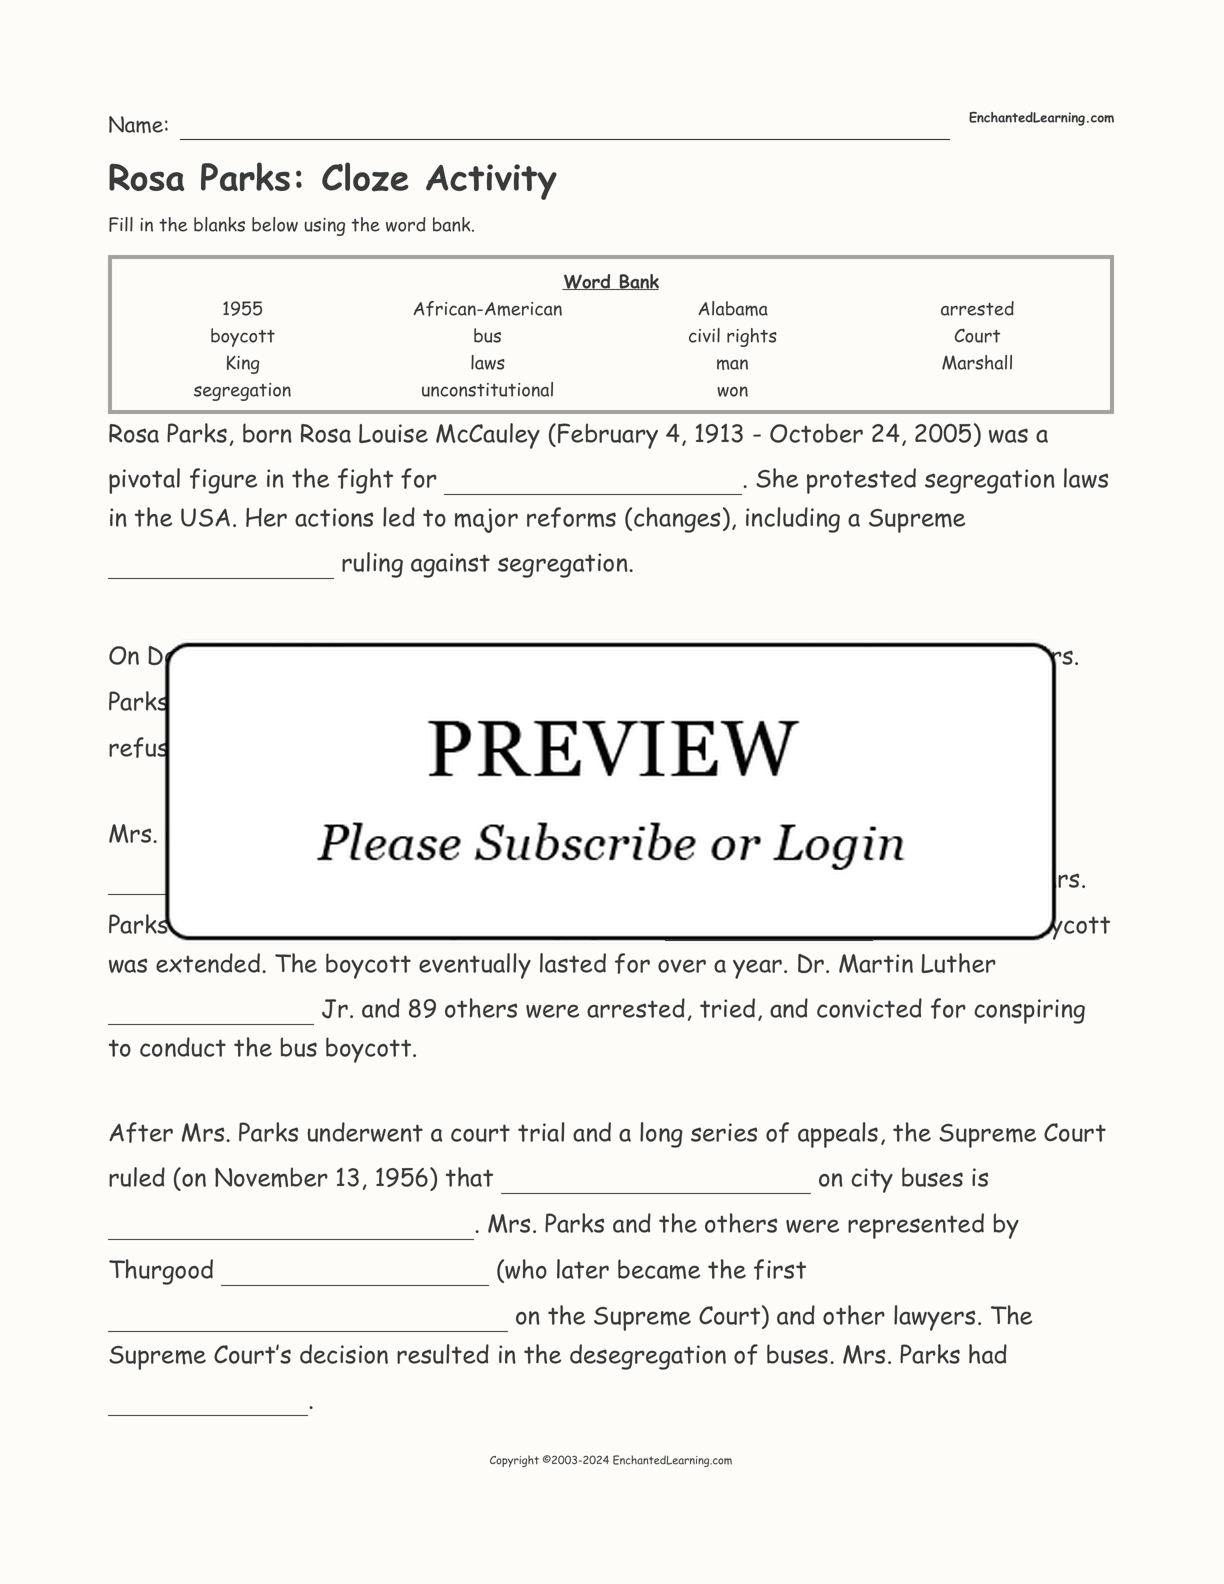 Rosa Parks: Cloze Activity interactive worksheet page 1